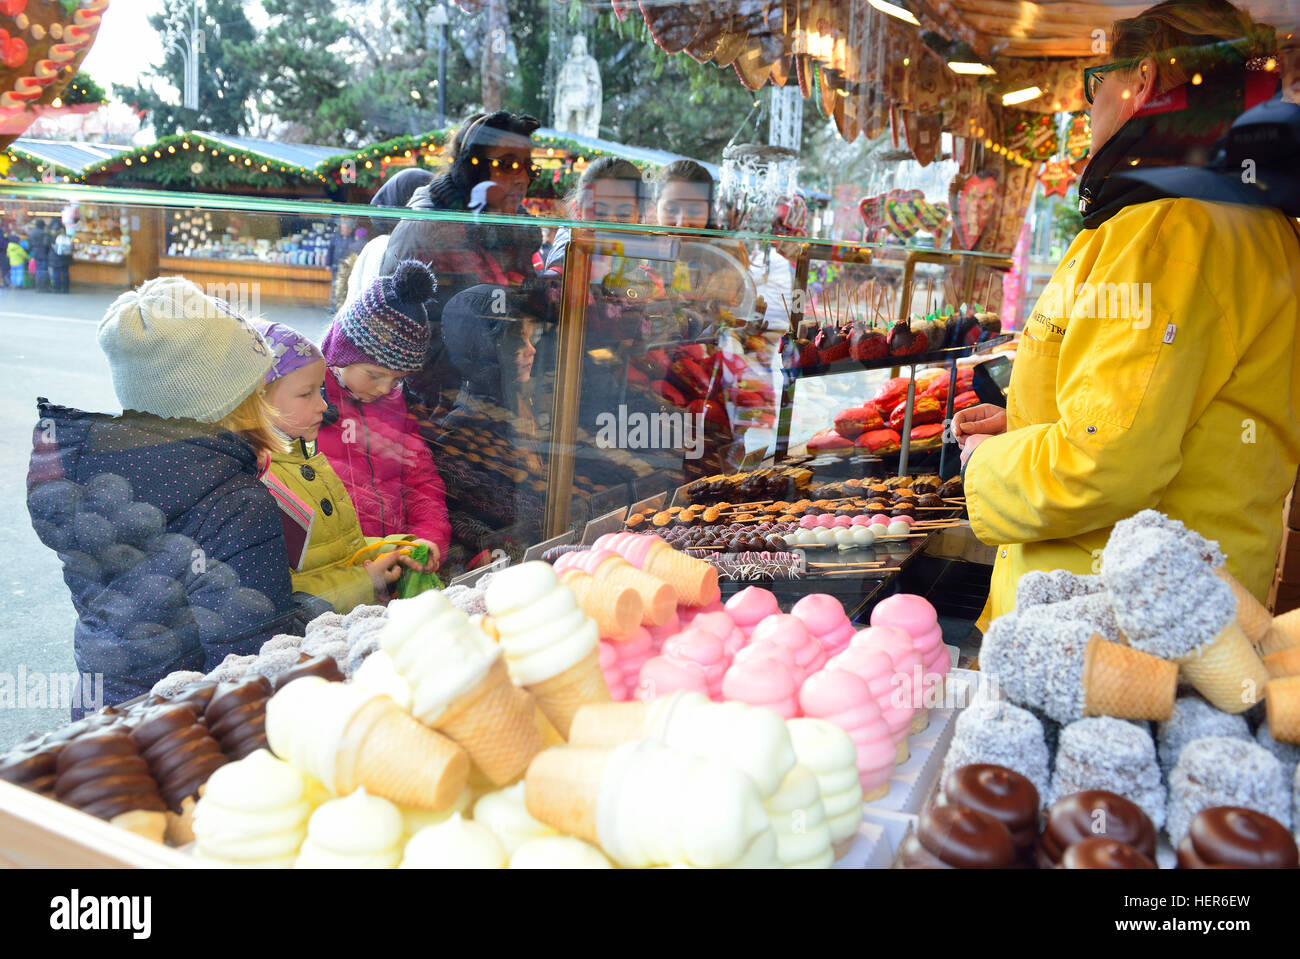 Children at a sweet and cake stall choosing  their delights to purchase at Rathauspark (Rathausplatz) Christmas Market , Vienna, Austria Stock Photo